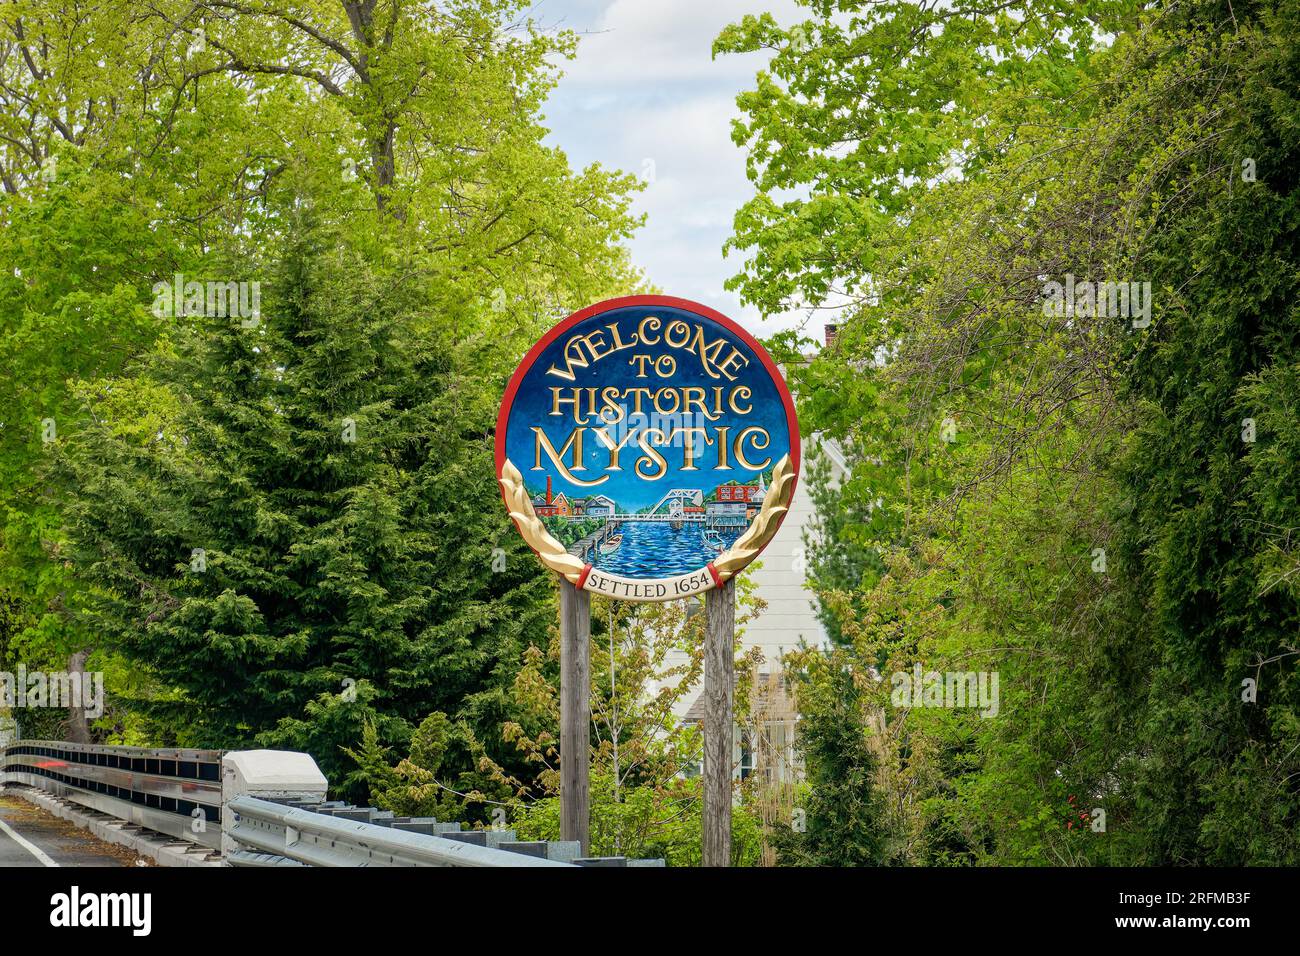 Mystic, CT - May 4, 2023: This is one of the 4 hand carved wooden signs that welcome you to the town of Mystic, Connecticut when you enter from any di Stock Photo